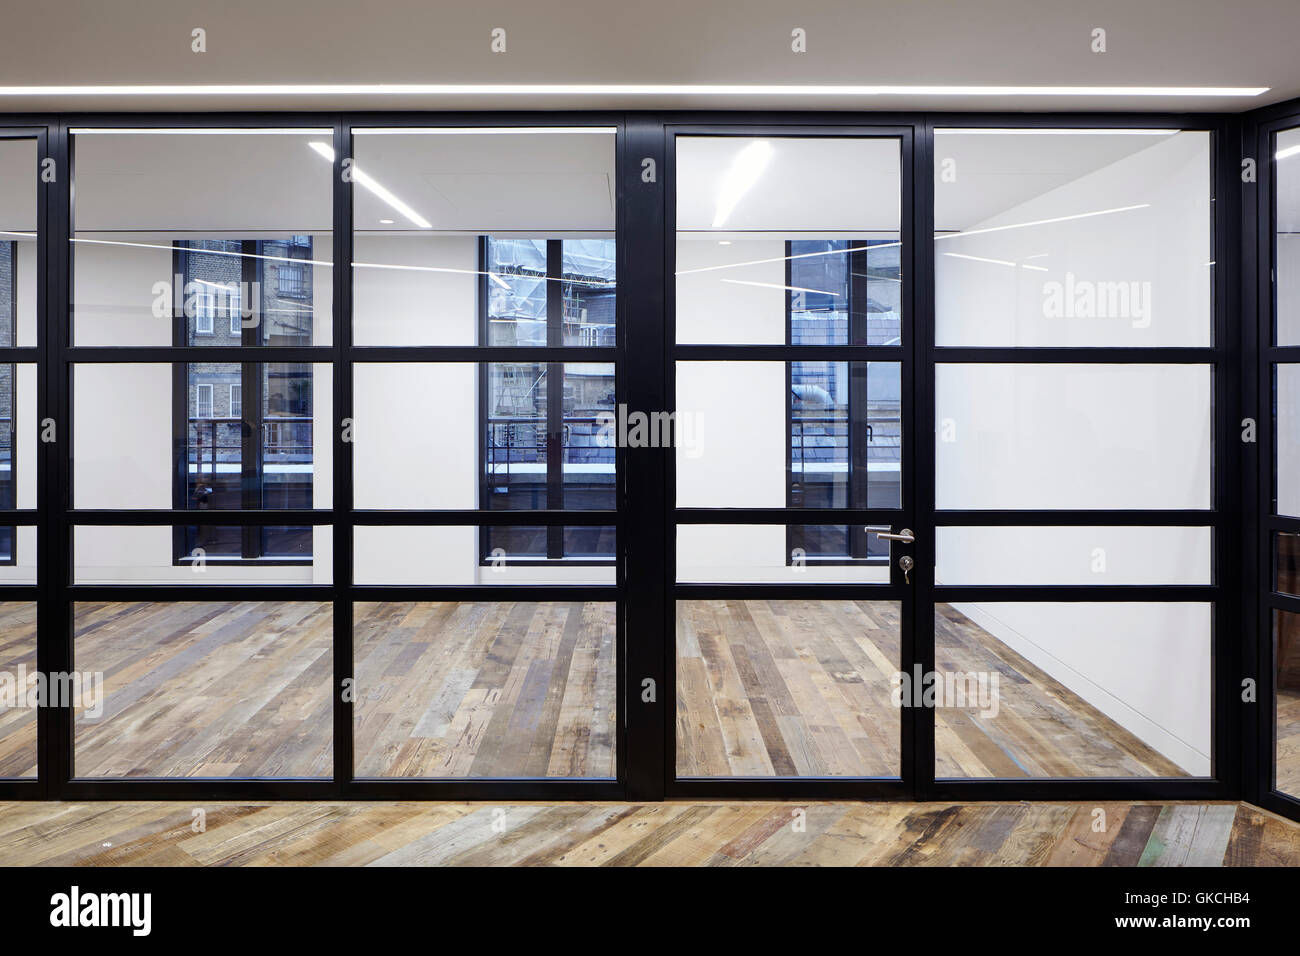 View of the office spaces with reclaimed 16th Century flooring. 54 Brooks Mews, London, United Kingdom. Architect: Stiff + Trevillion Architects, 2016. Stock Photo